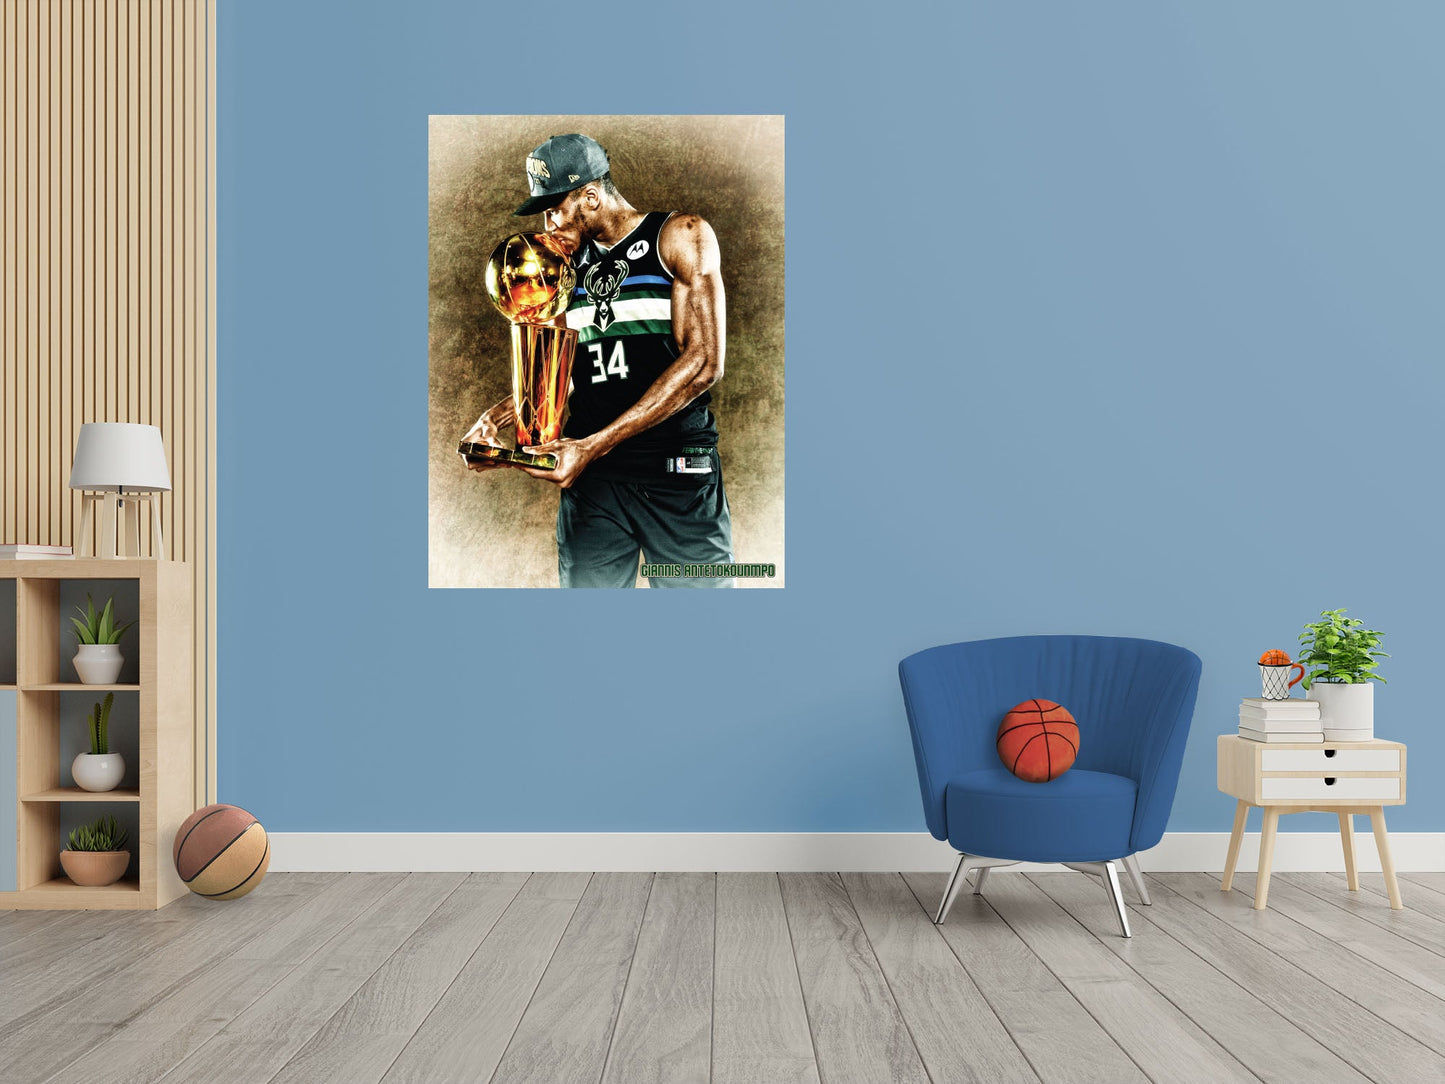 Milwaukee Bucks: Giannis Antetokounmpo 2021 Trophy Kiss Mural        - Officially Licensed NBA Removable Wall   Adhesive Decal